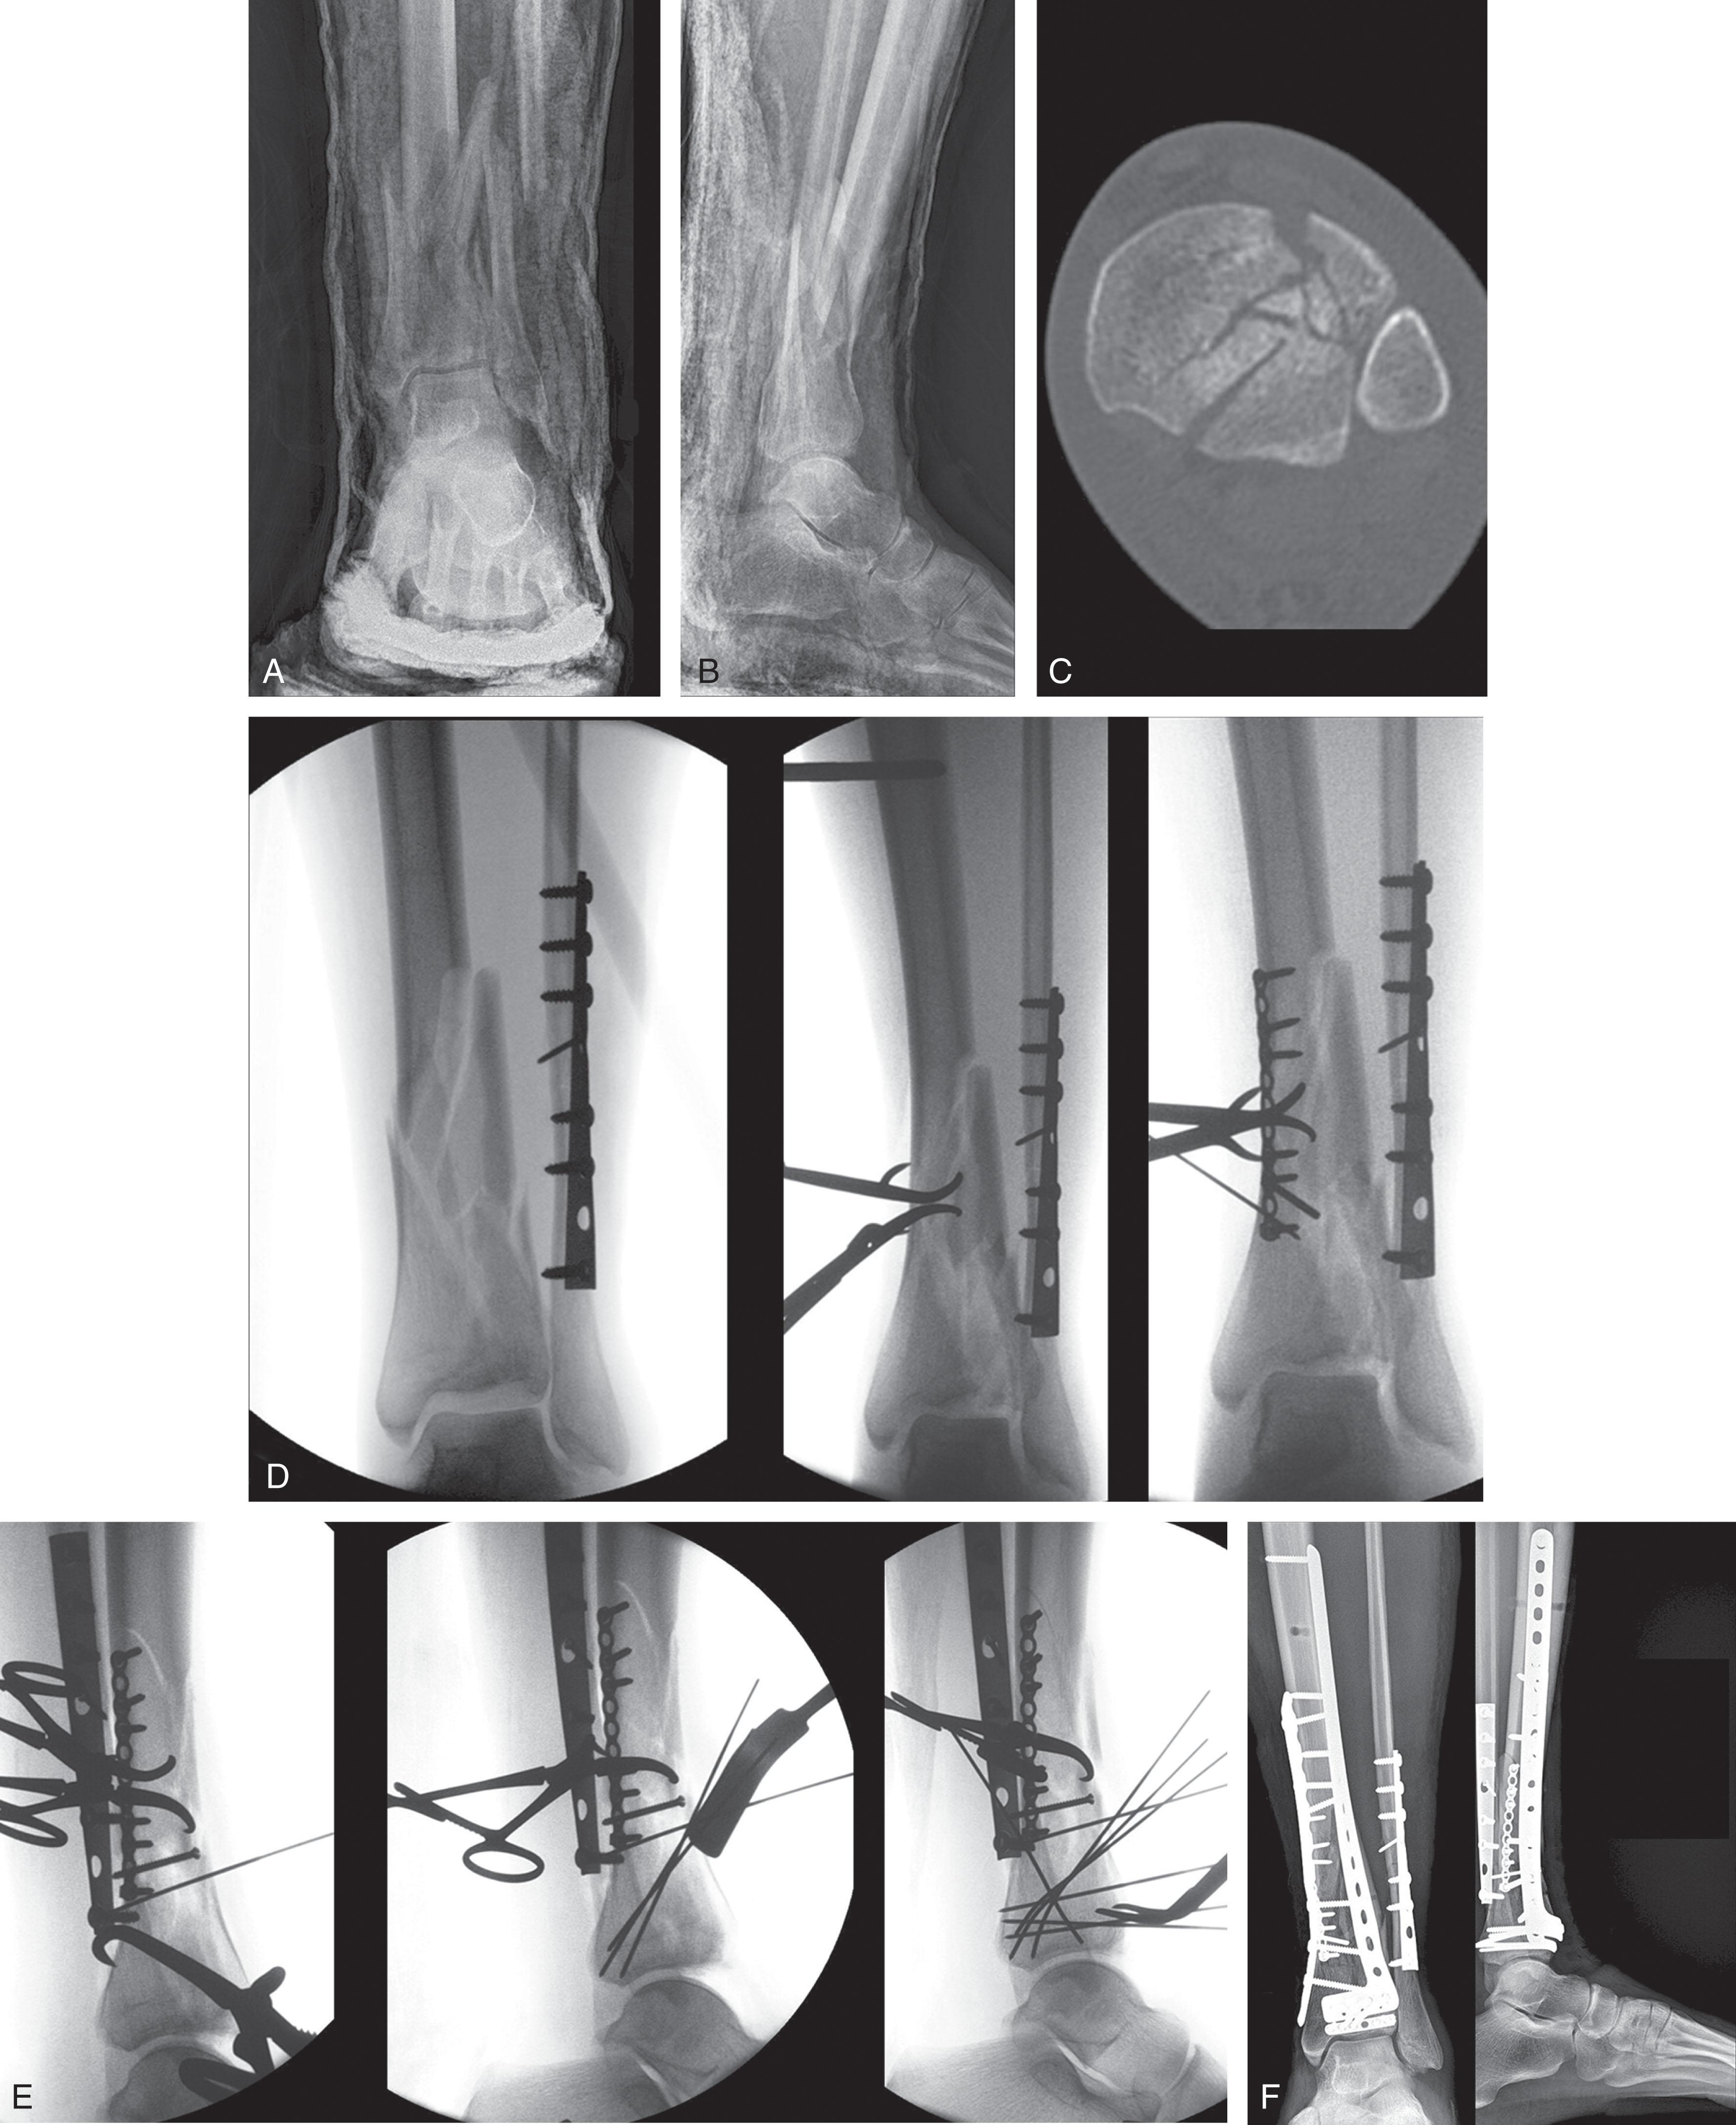 Fig. 43-15, A and B , Radiographs and C , a CT scan of a C-type pilon fracture treated with an anterolateral approach. CT scan shows a lateral exit of the anterior fracture with central impaction. D and E , Intraoperative fluoroscopy views showing fracture reduction using an anterolateral approach. In this case a posteromedial approach was added to realign the articular block to the shaft. Because the patient was supine, the posterior malleolus was reduced indirectly using a reduction clamp passed through the distal extent of the posteromedial incision. F , Definitive fixation was achieved with both anterolateral and medial plating.